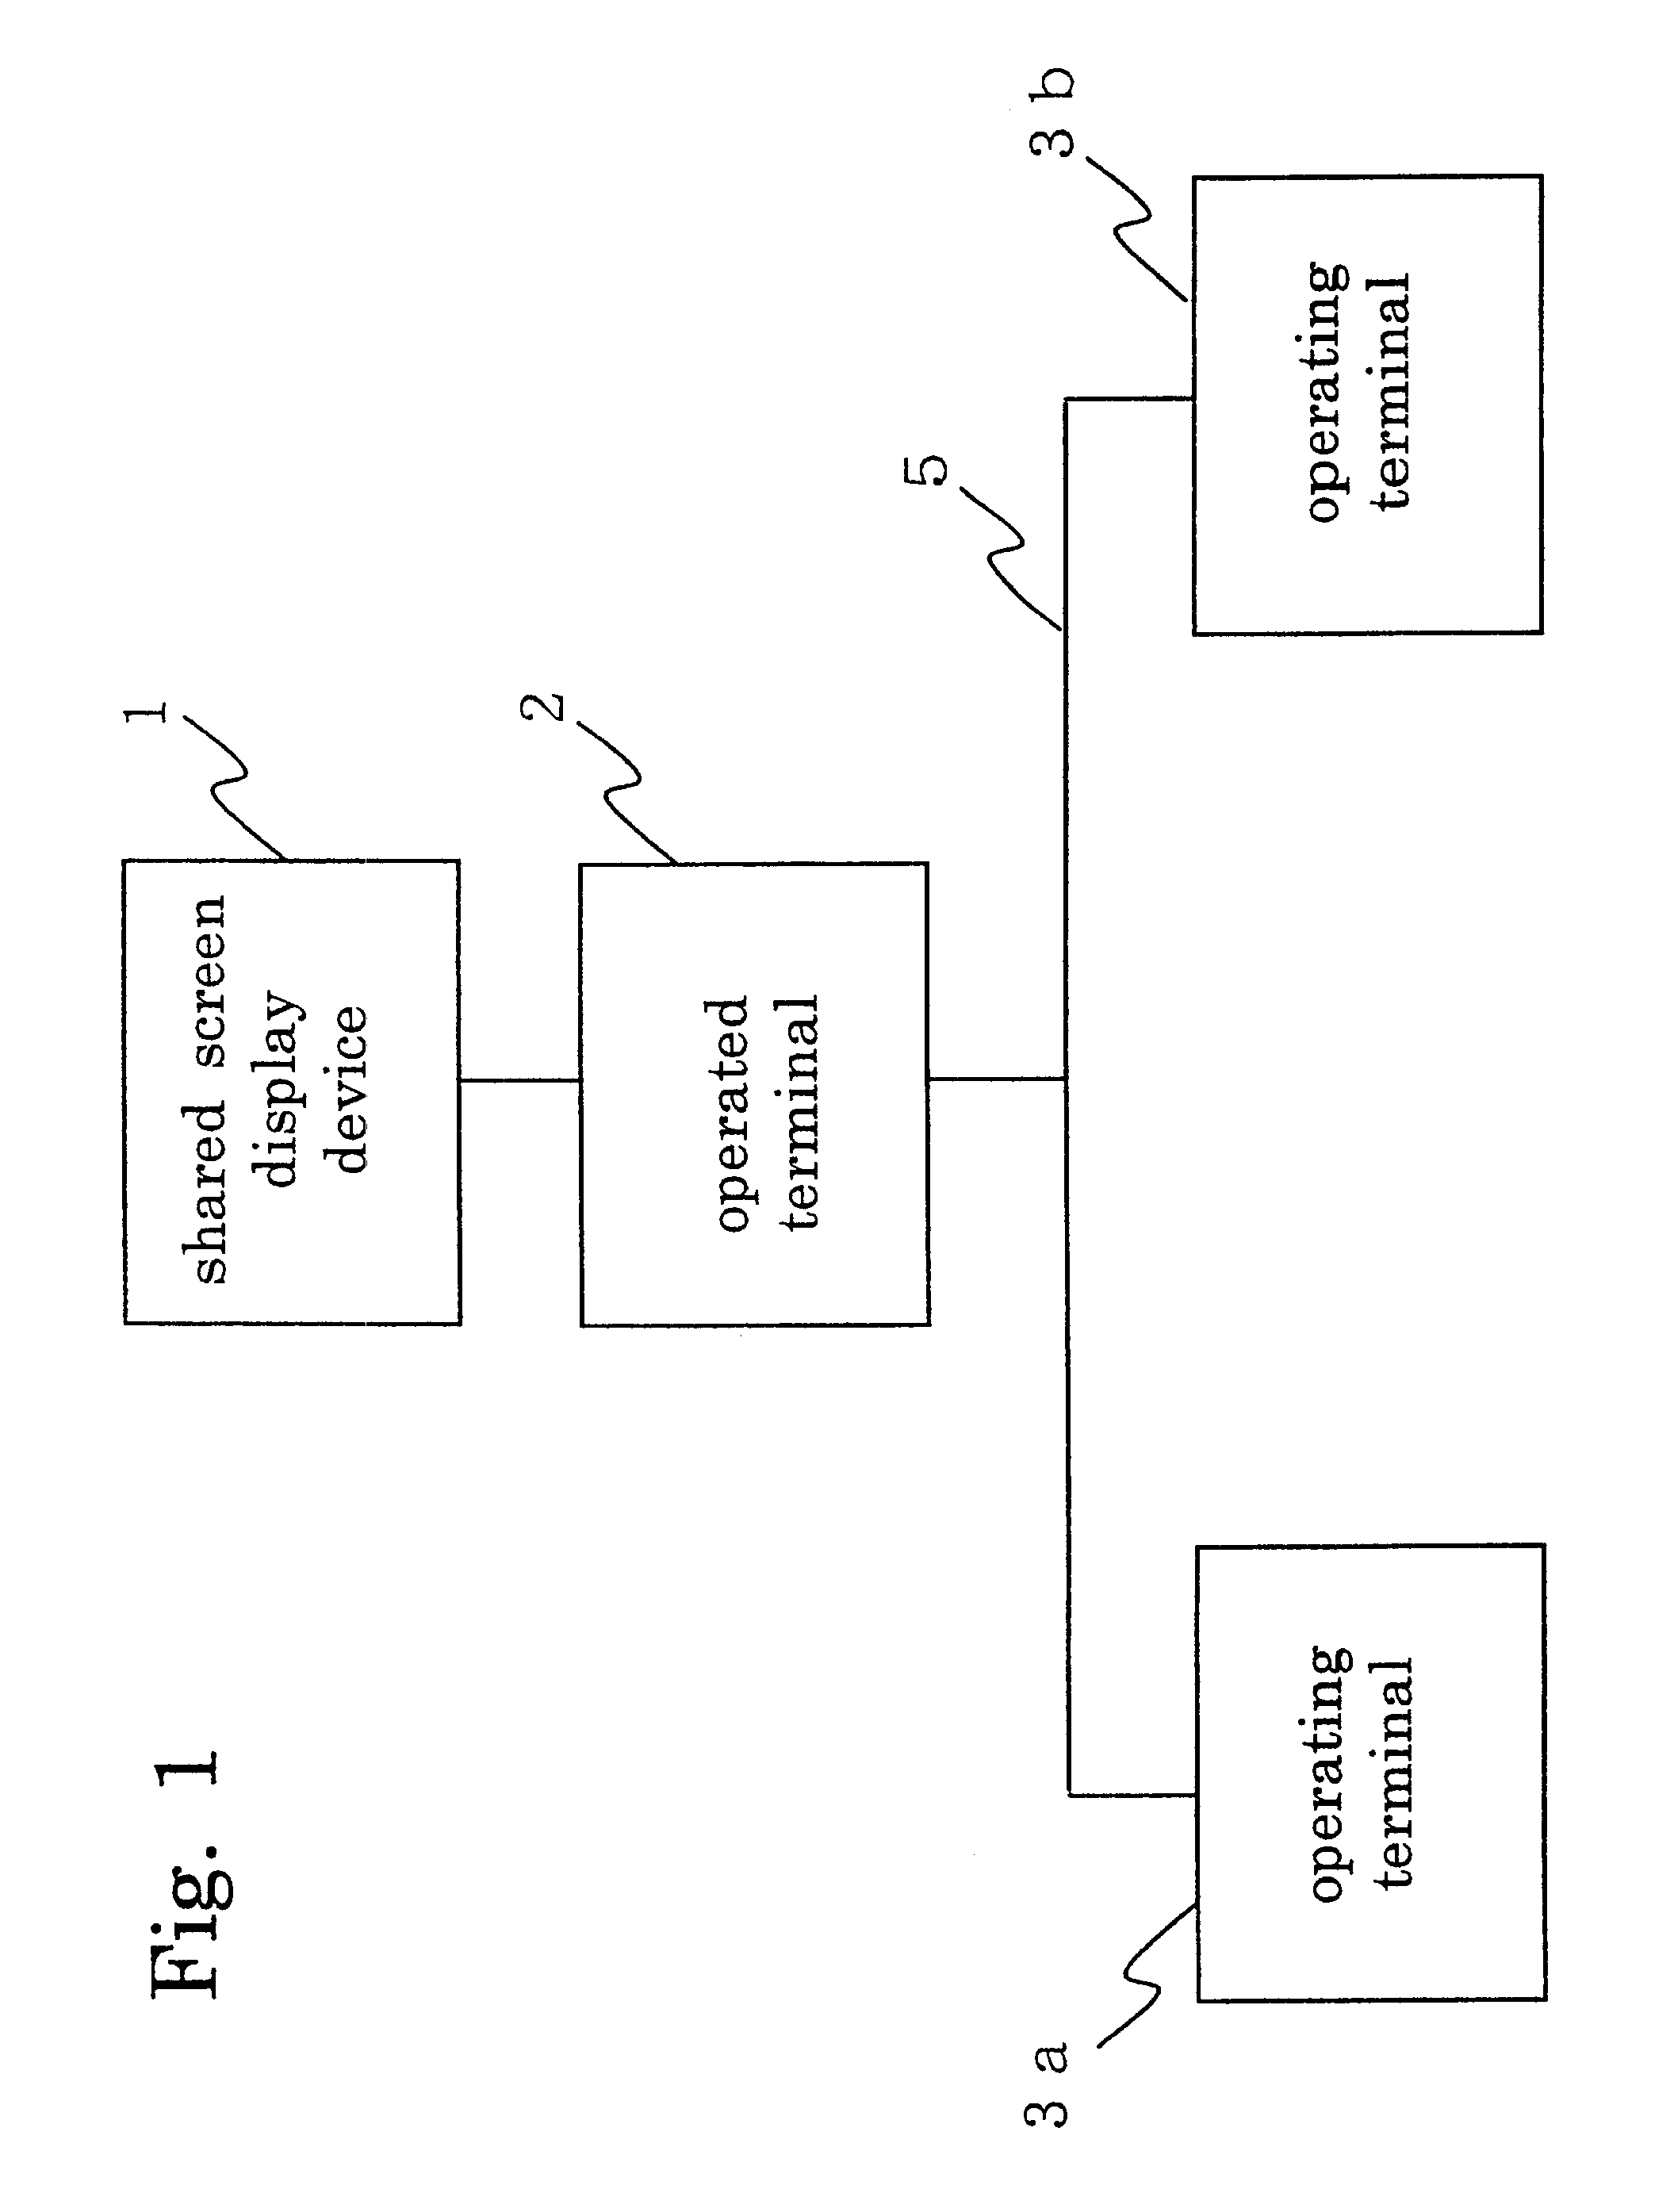 Terminal operation system